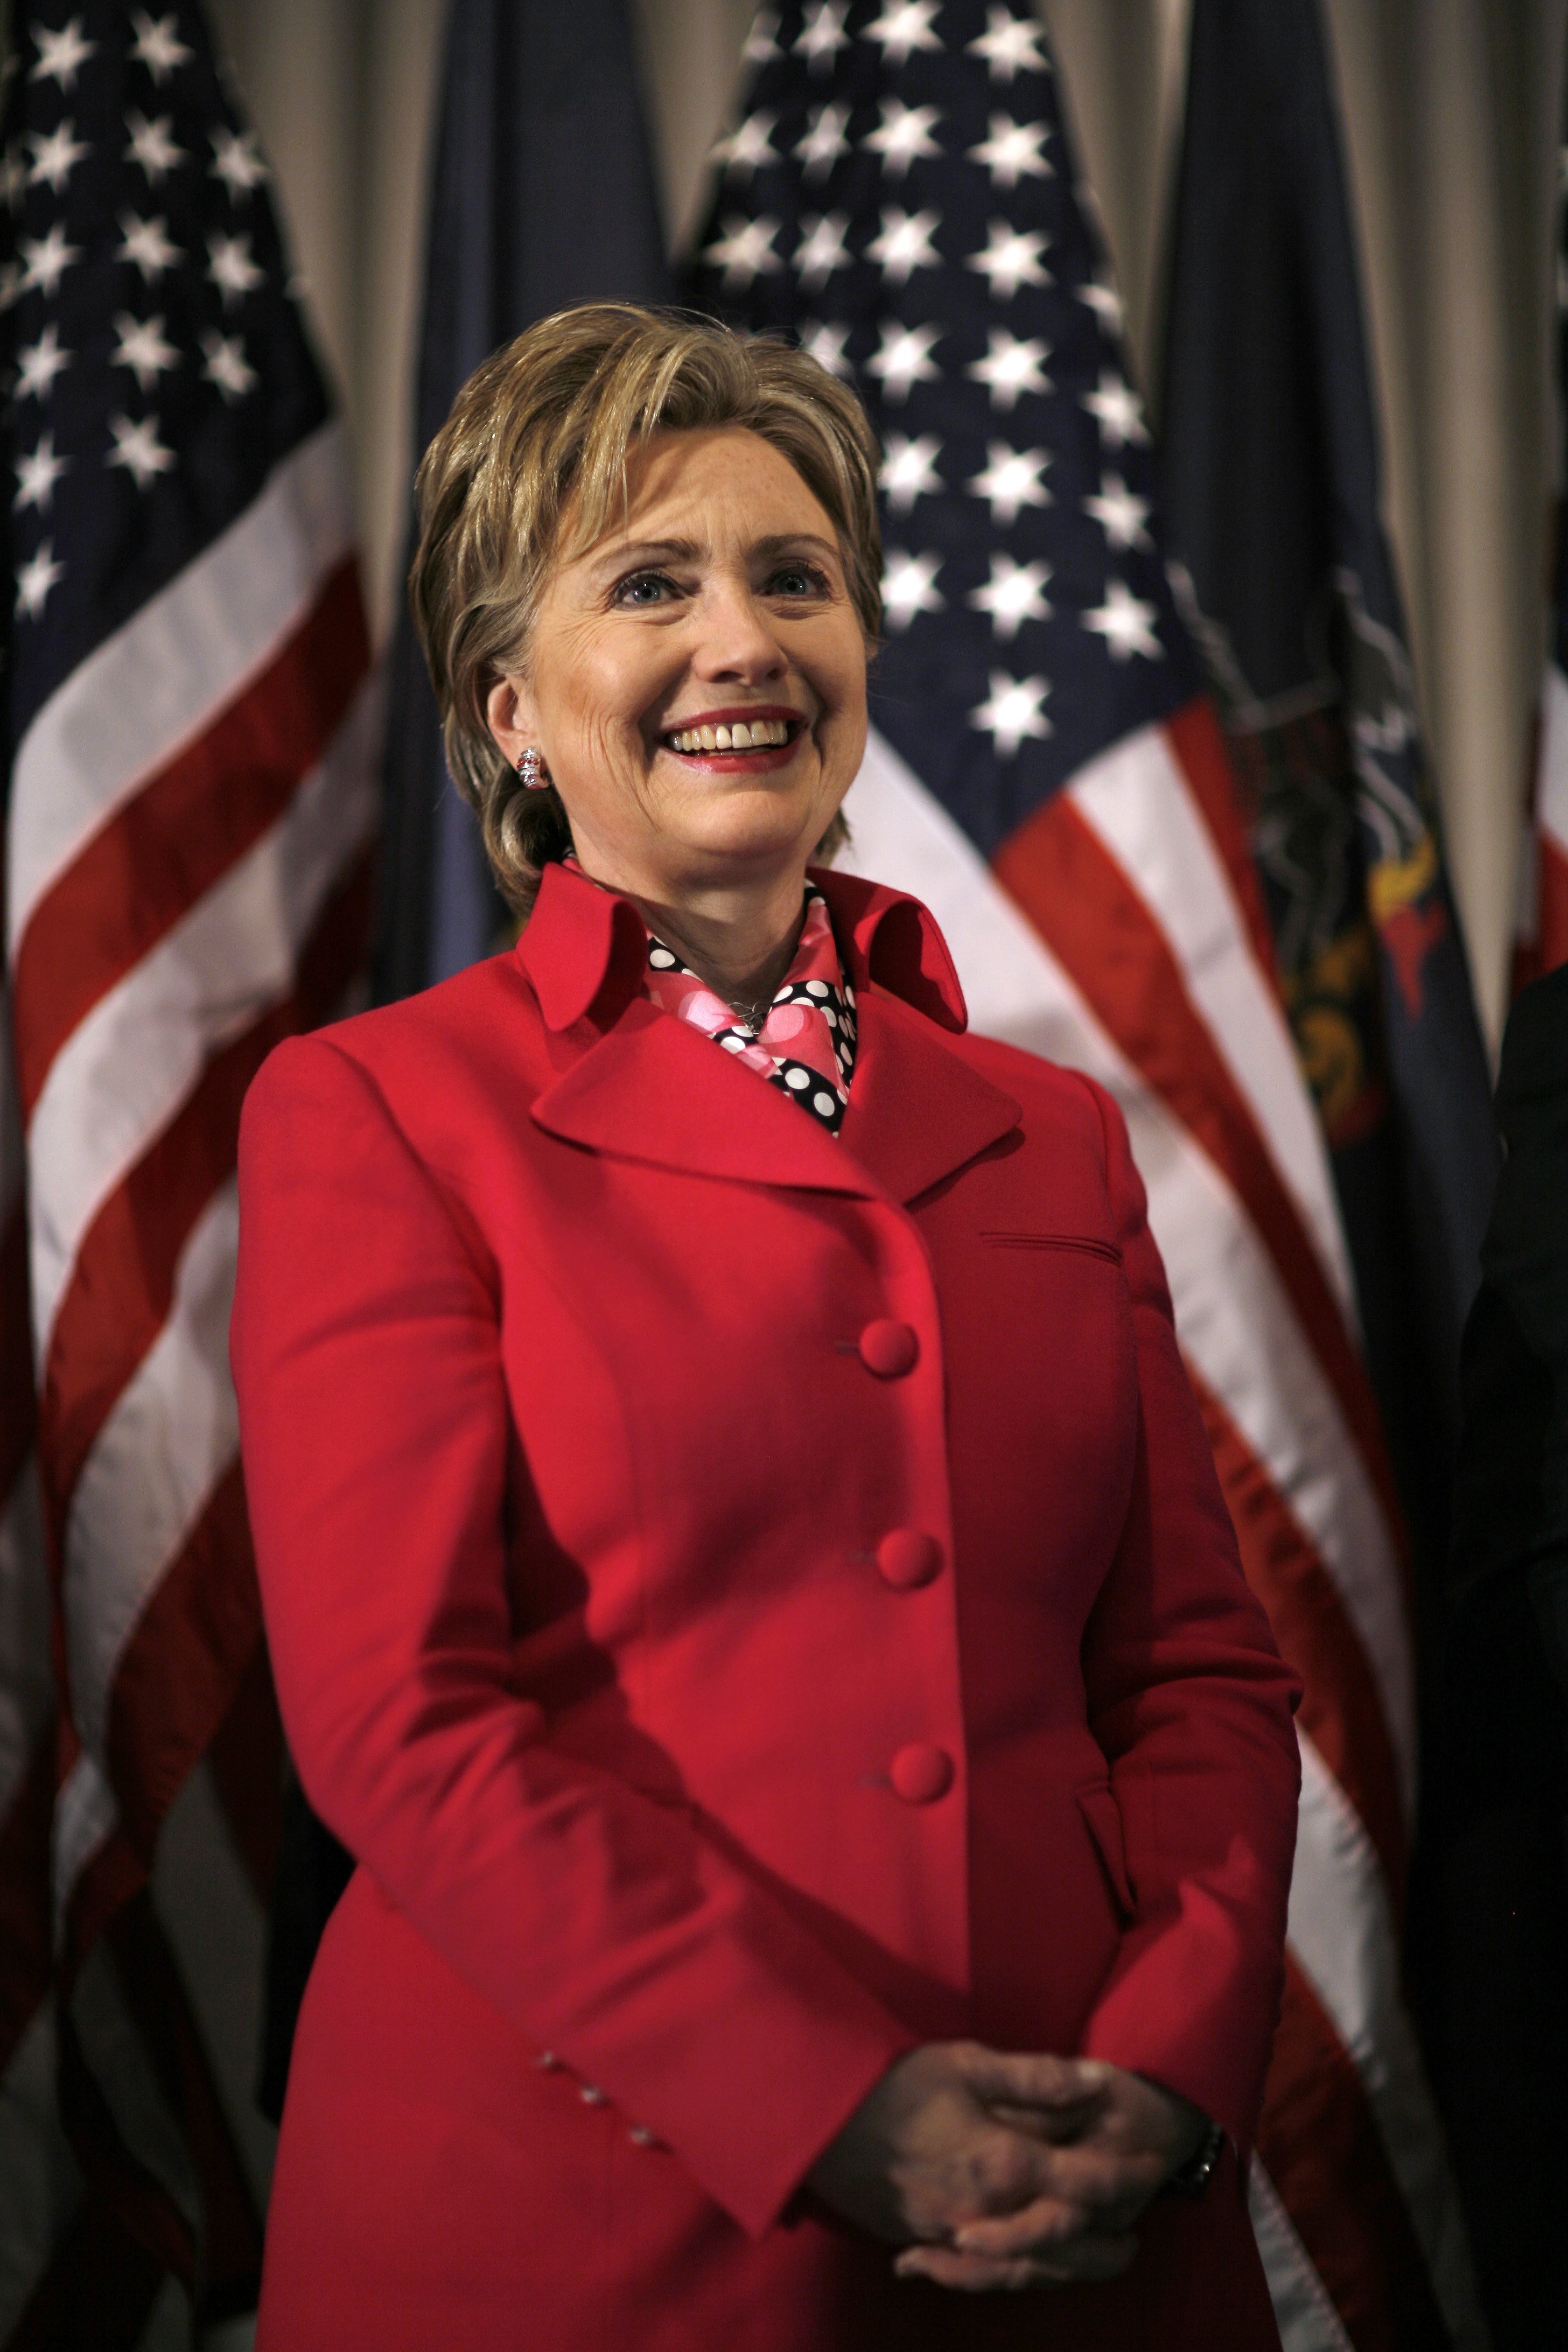 Hillary Clinton during her campaign | Image: Getty Images